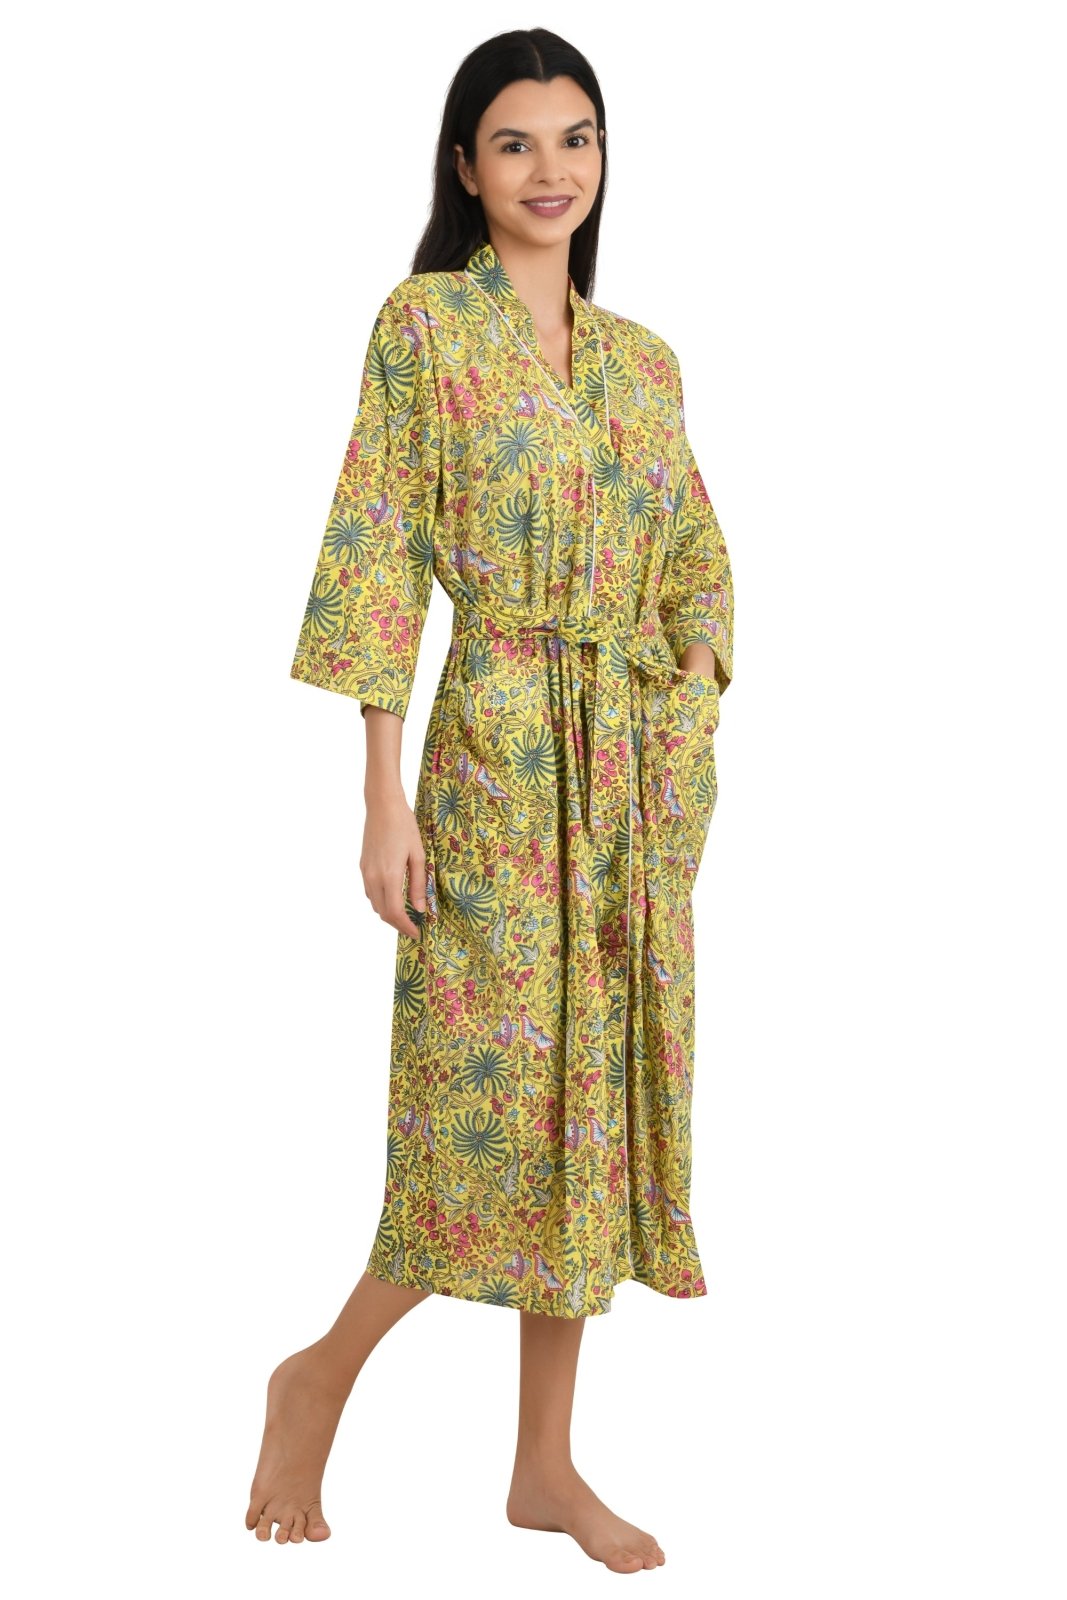 Boho Cotton Kimono House Robe Indian Handprinted Butterfly Print Pattern | Lightweight Summer Luxury Beach Holidays Yacht Cover Up Stunning Dress - The Eastern Loom